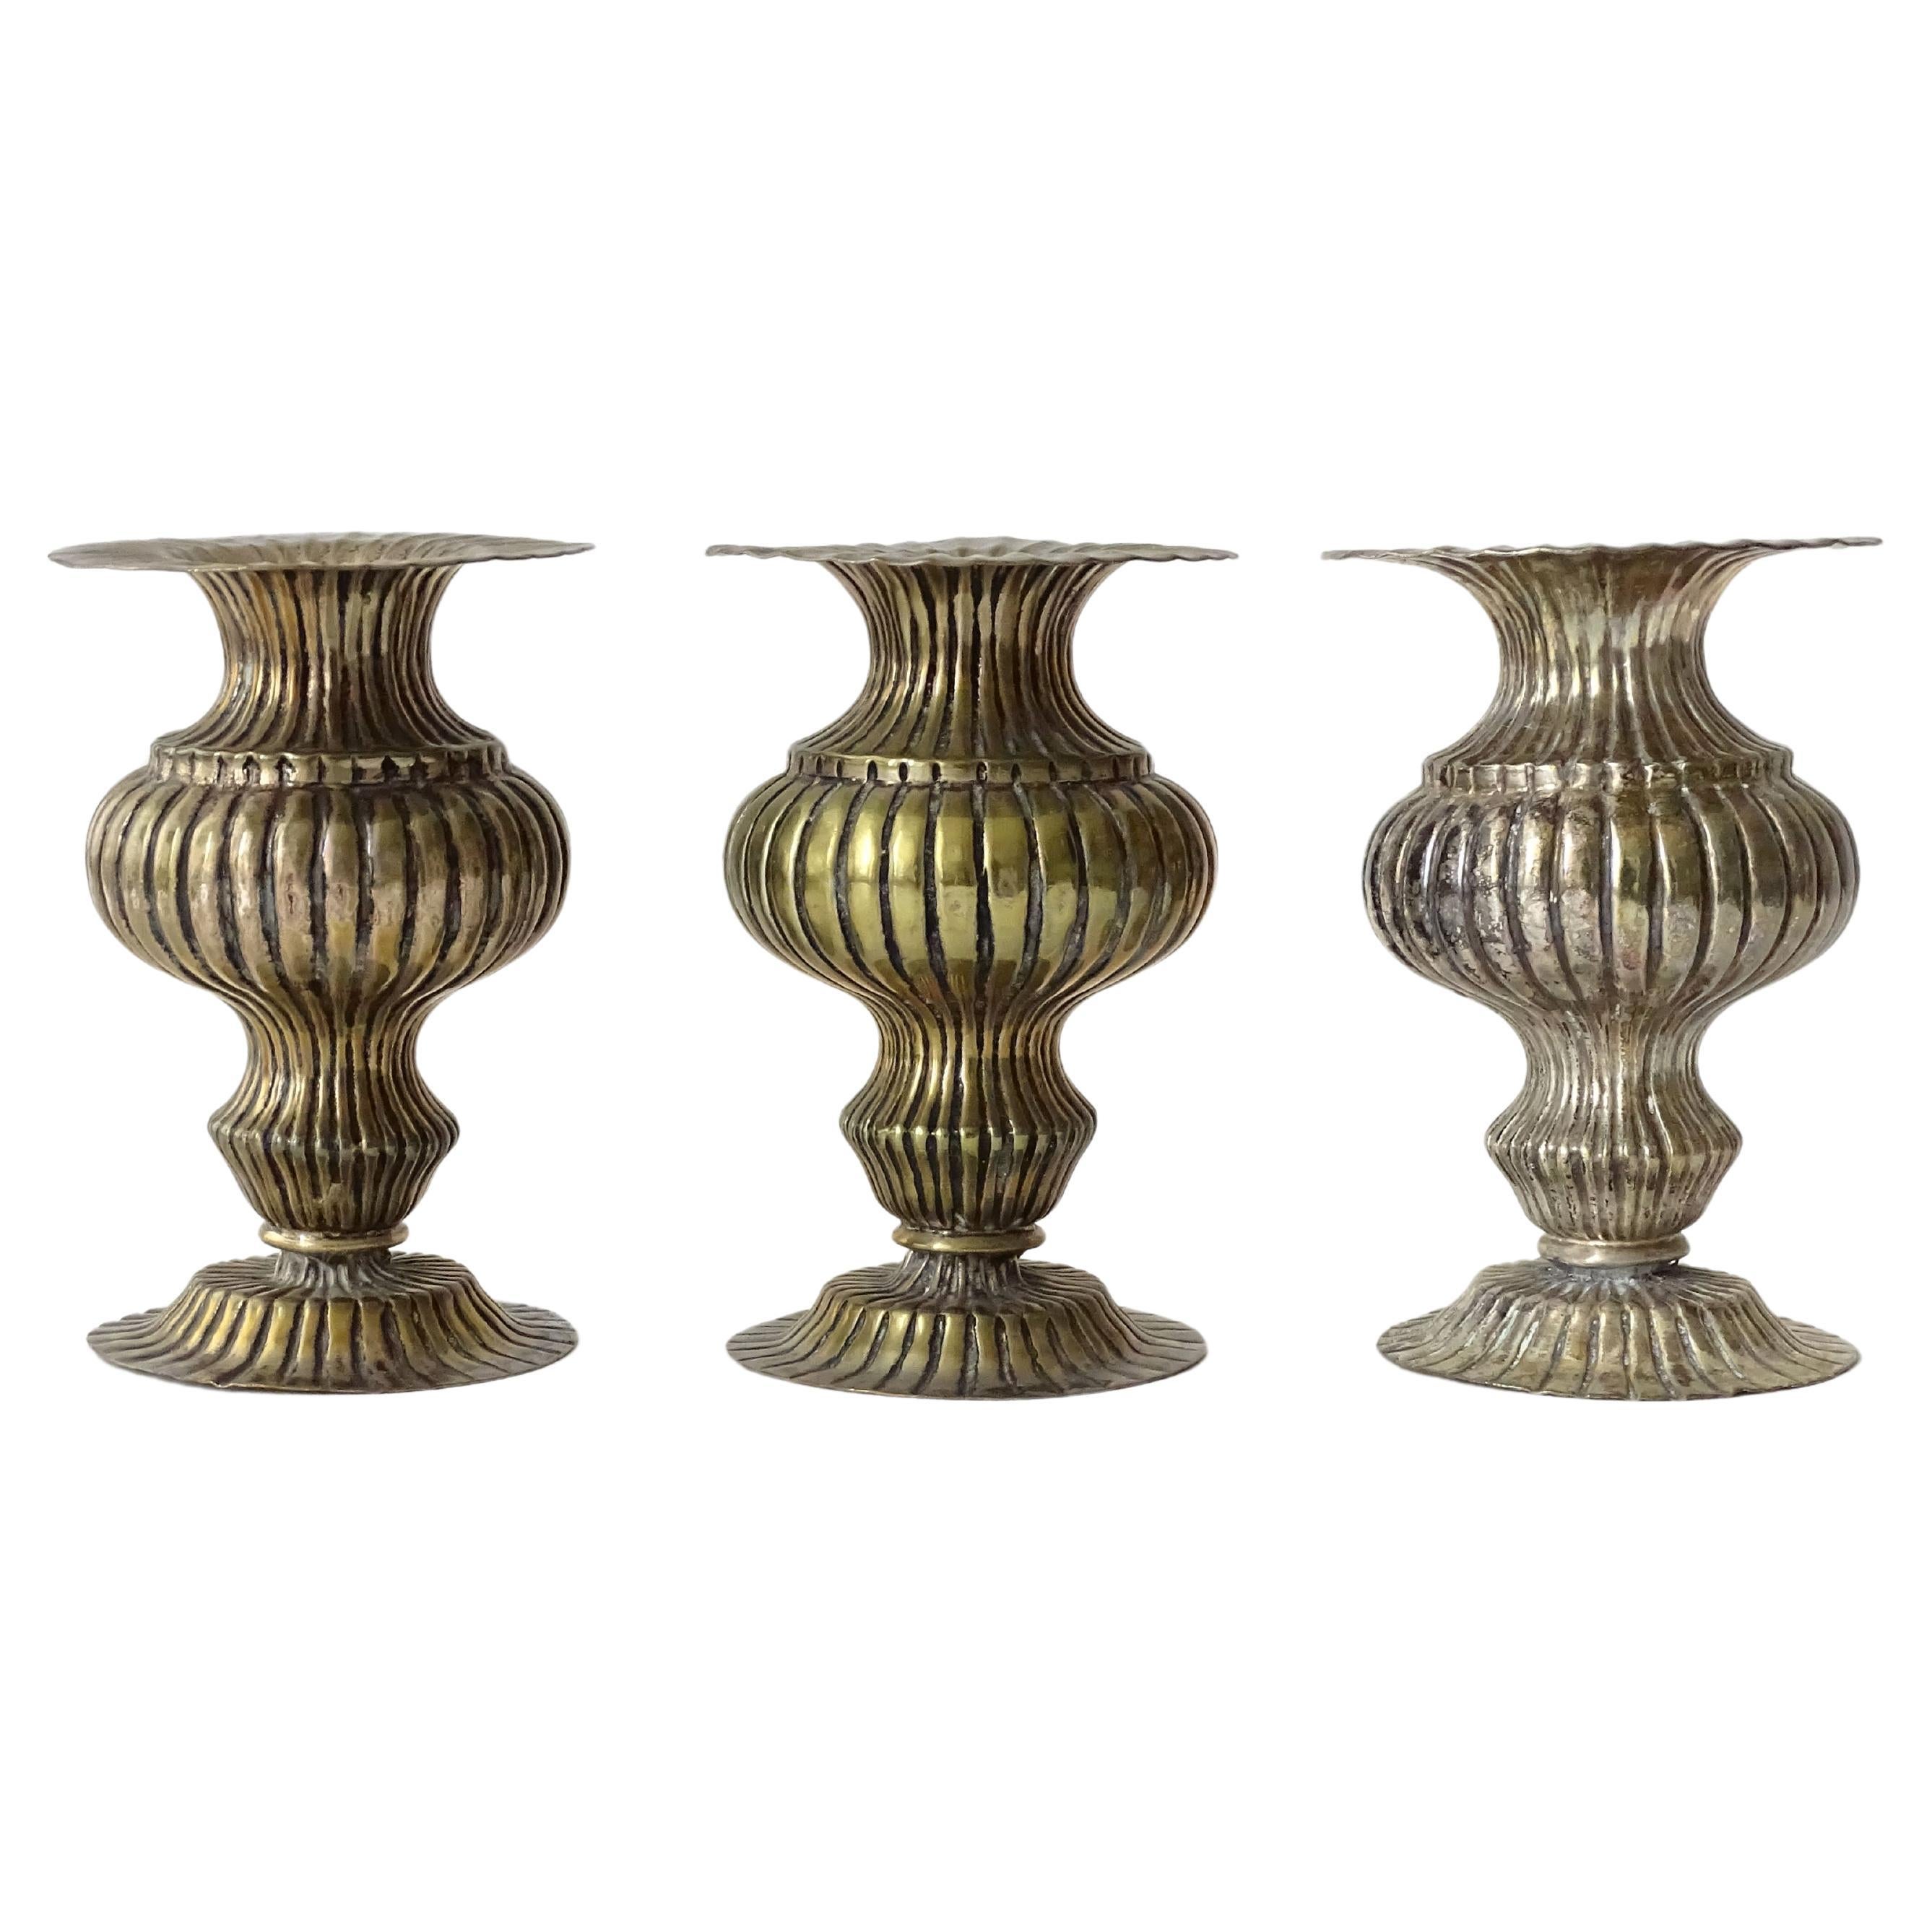 Three Small Antique Silverplate Soliflor Vases, Italy 1920s